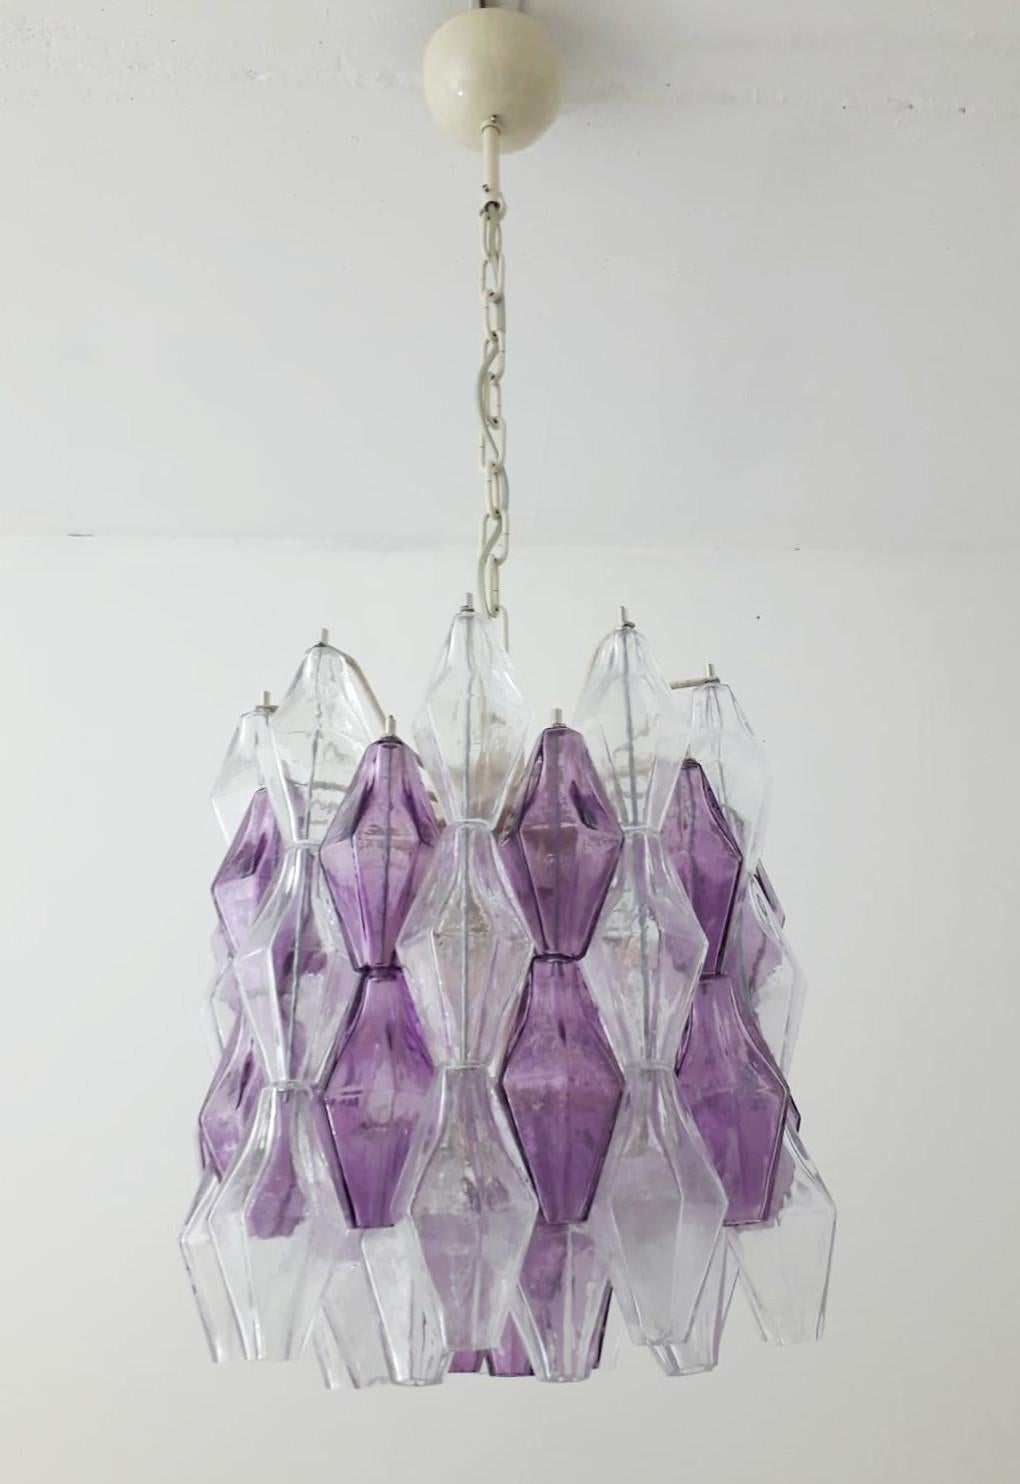 Italian Poliedri Chandeliers by Venini - 2 Available For Sale